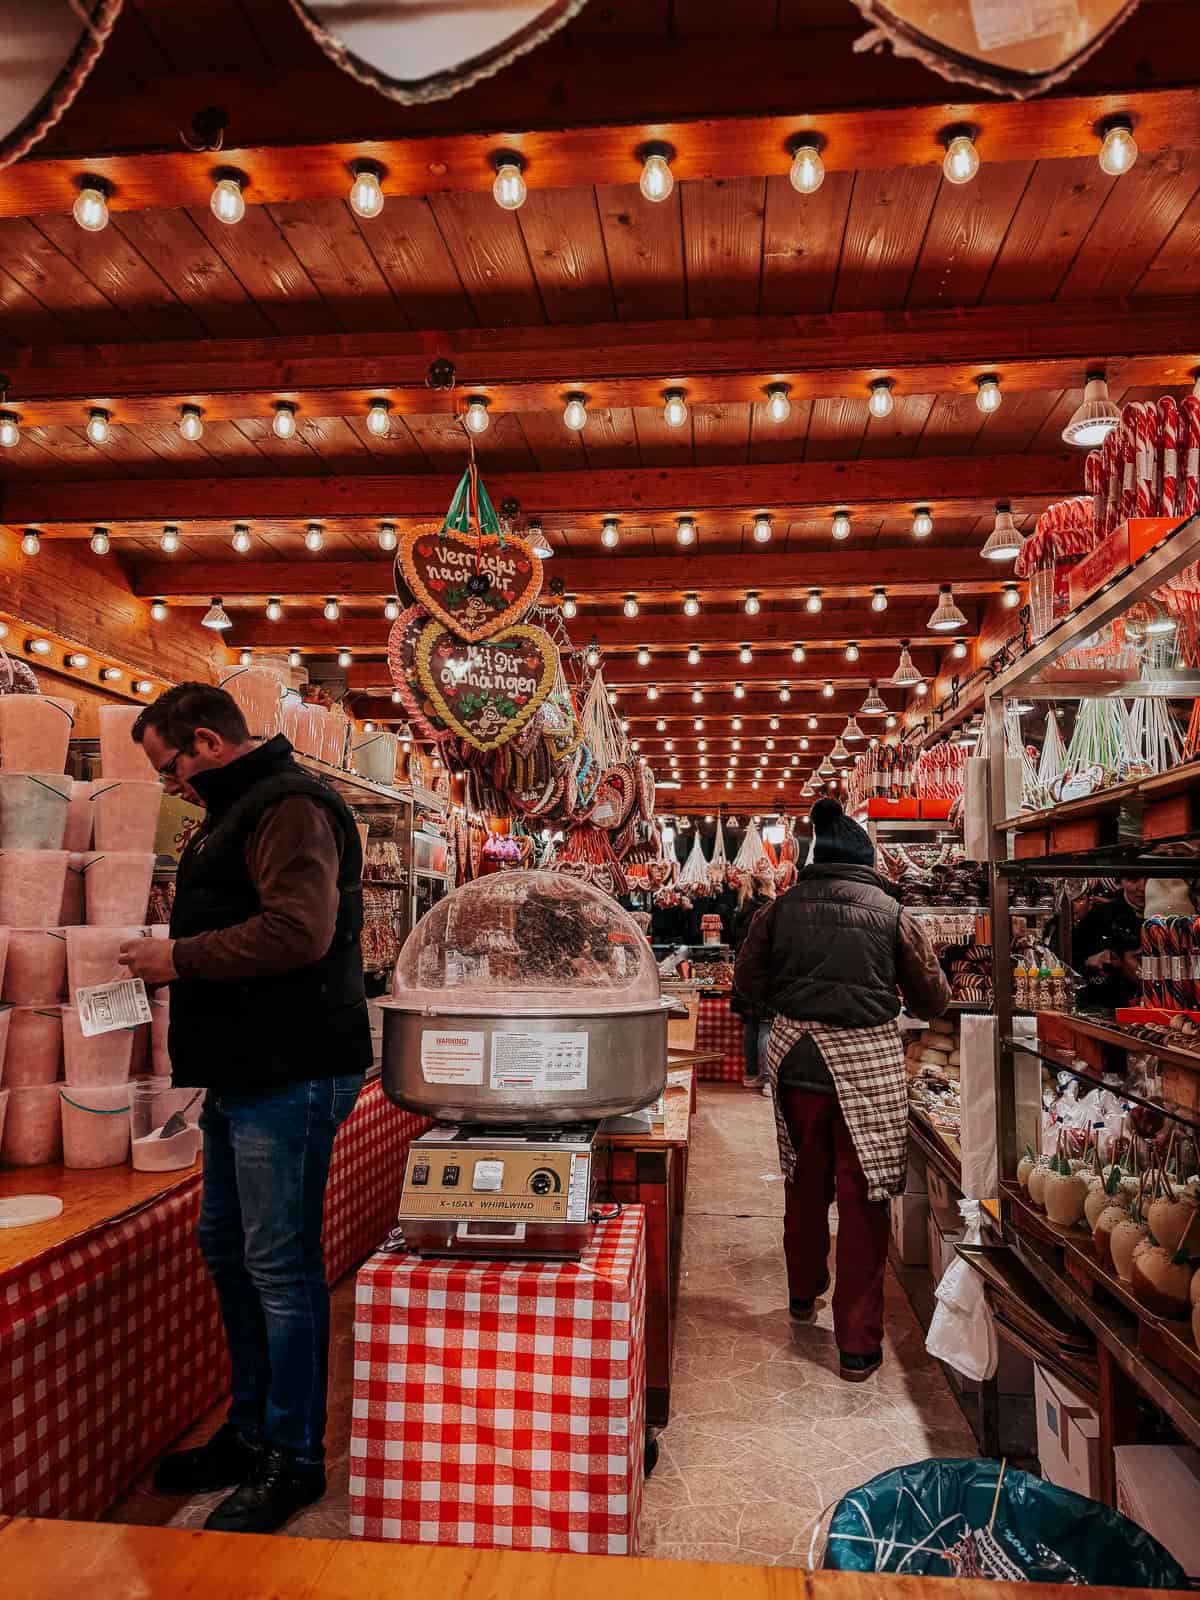 Inside a market stall lined with wood and warmly lit by overhead bulbs, showcasing an array of colorful candies and confections. Shoppers are seen browsing and purchasing, adding a busy and cheerful vibe to the setting